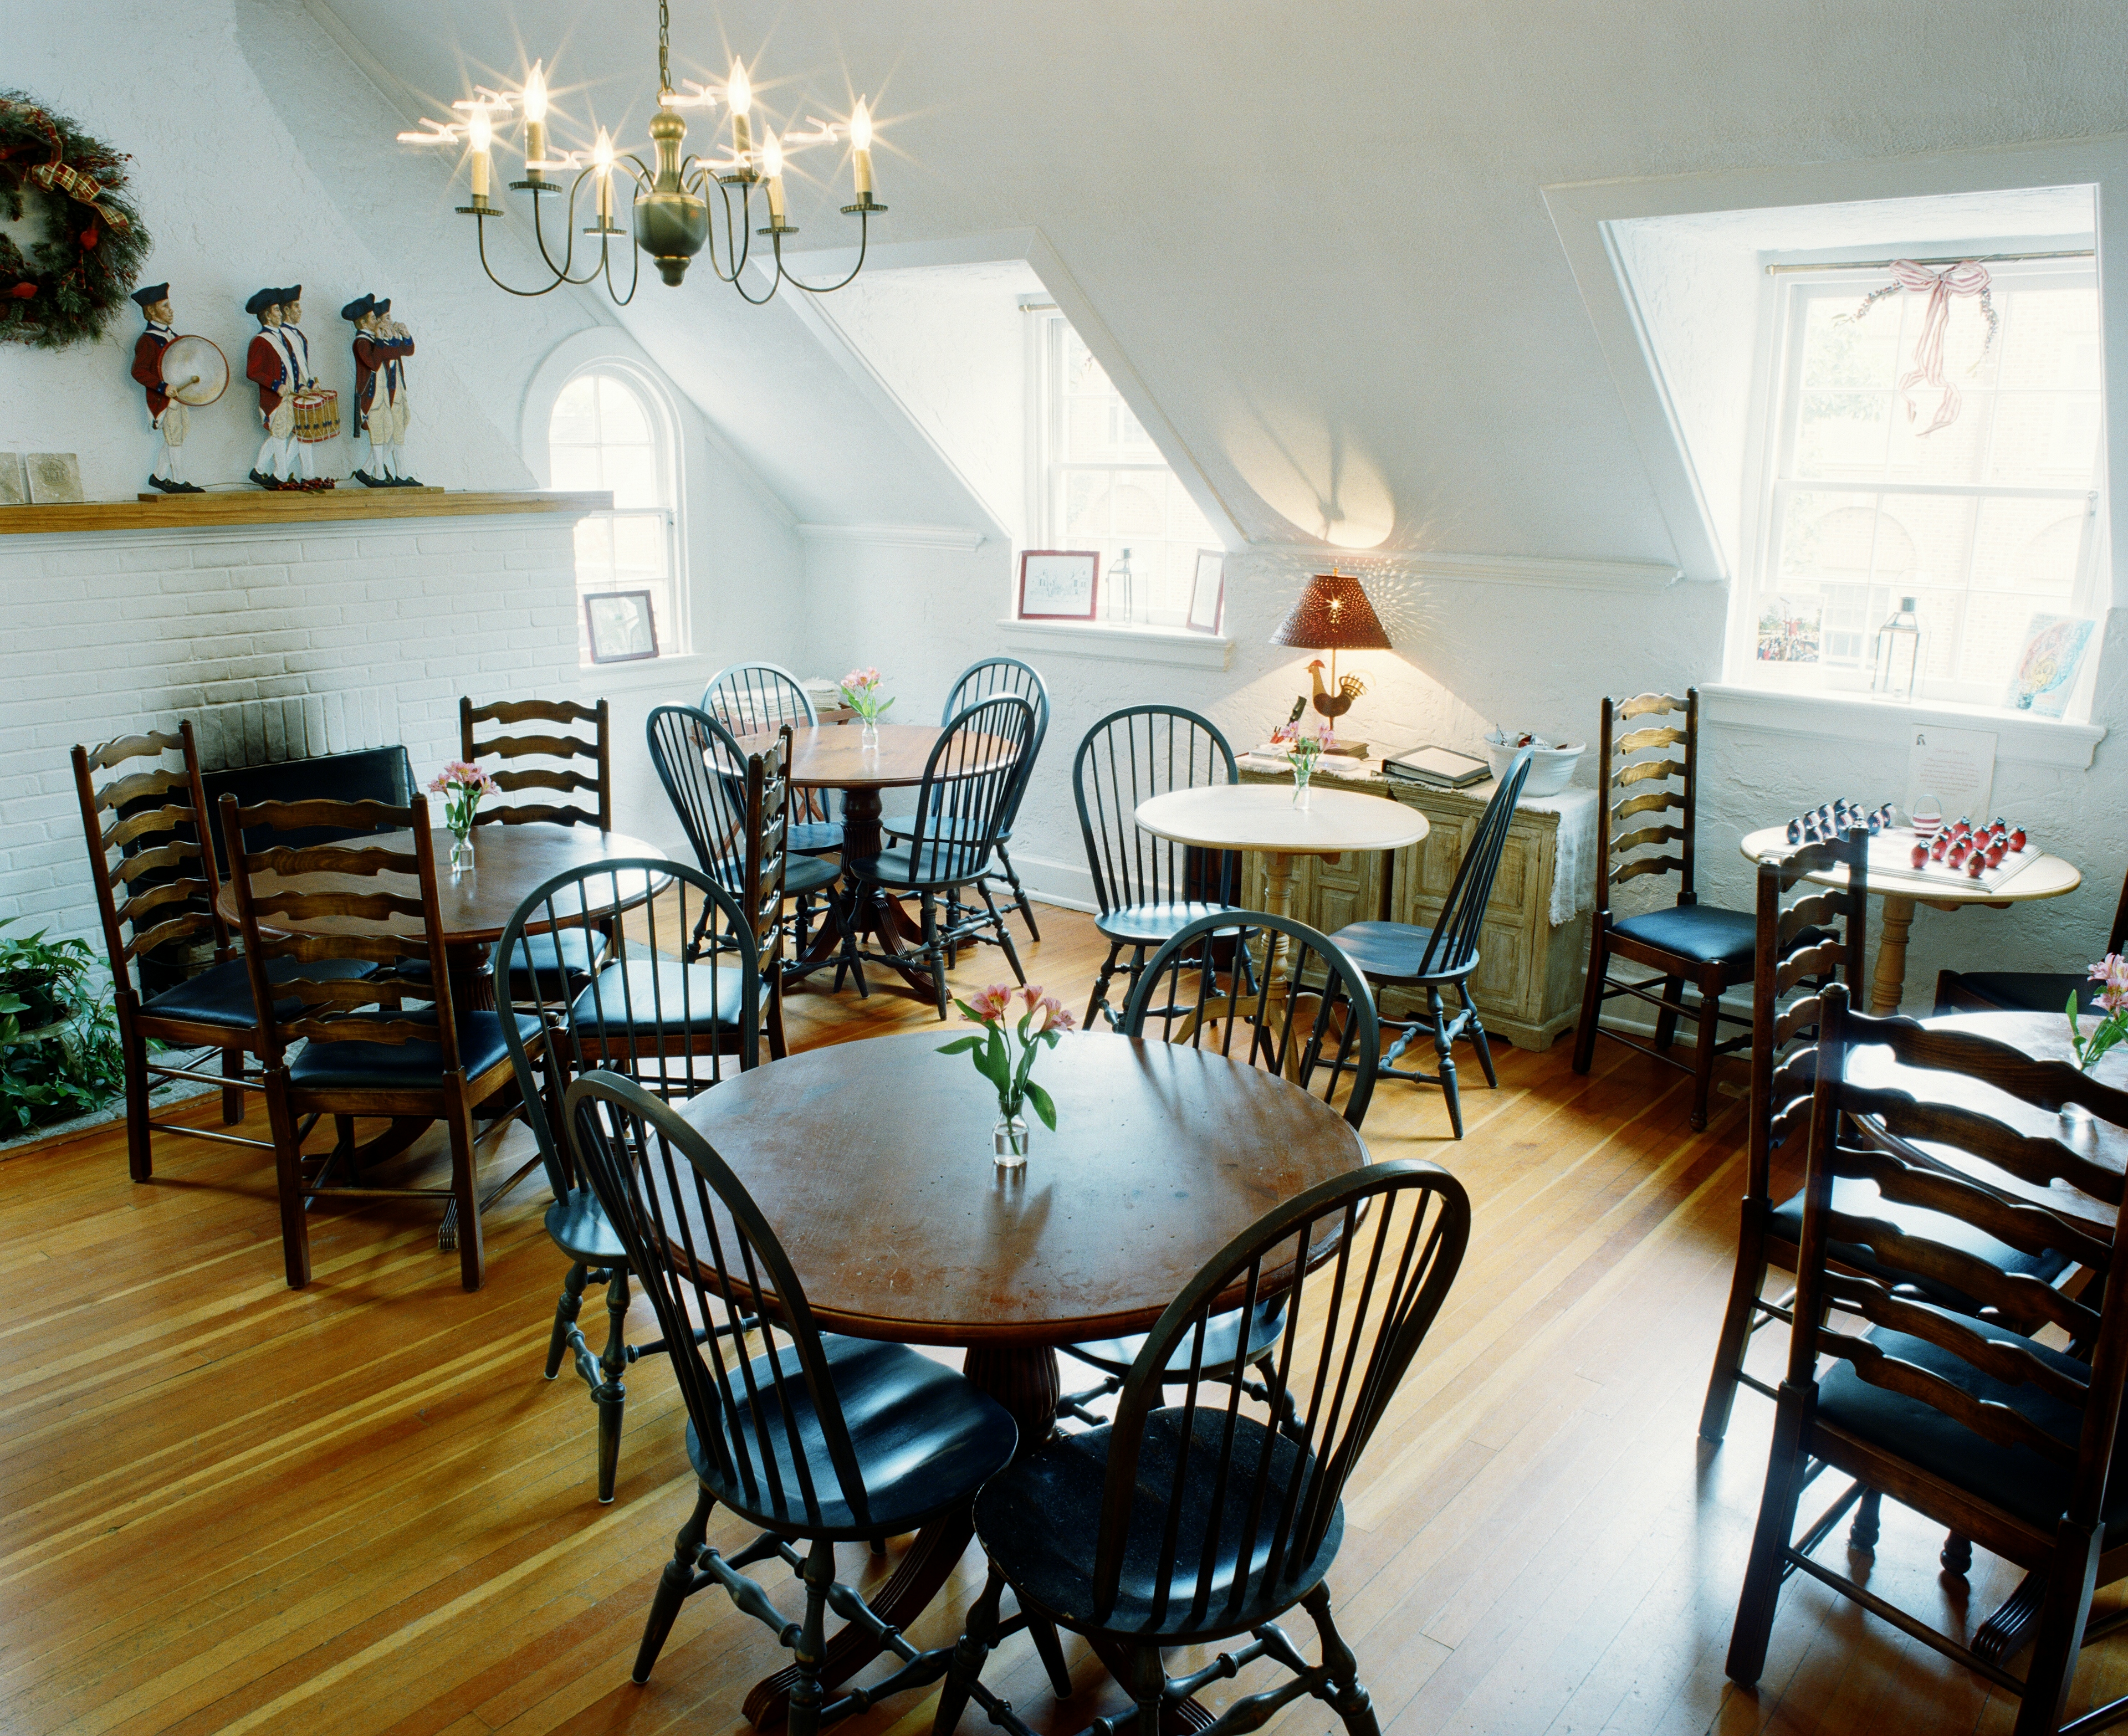 Dining room with round tables, tall back chairs and wood floors